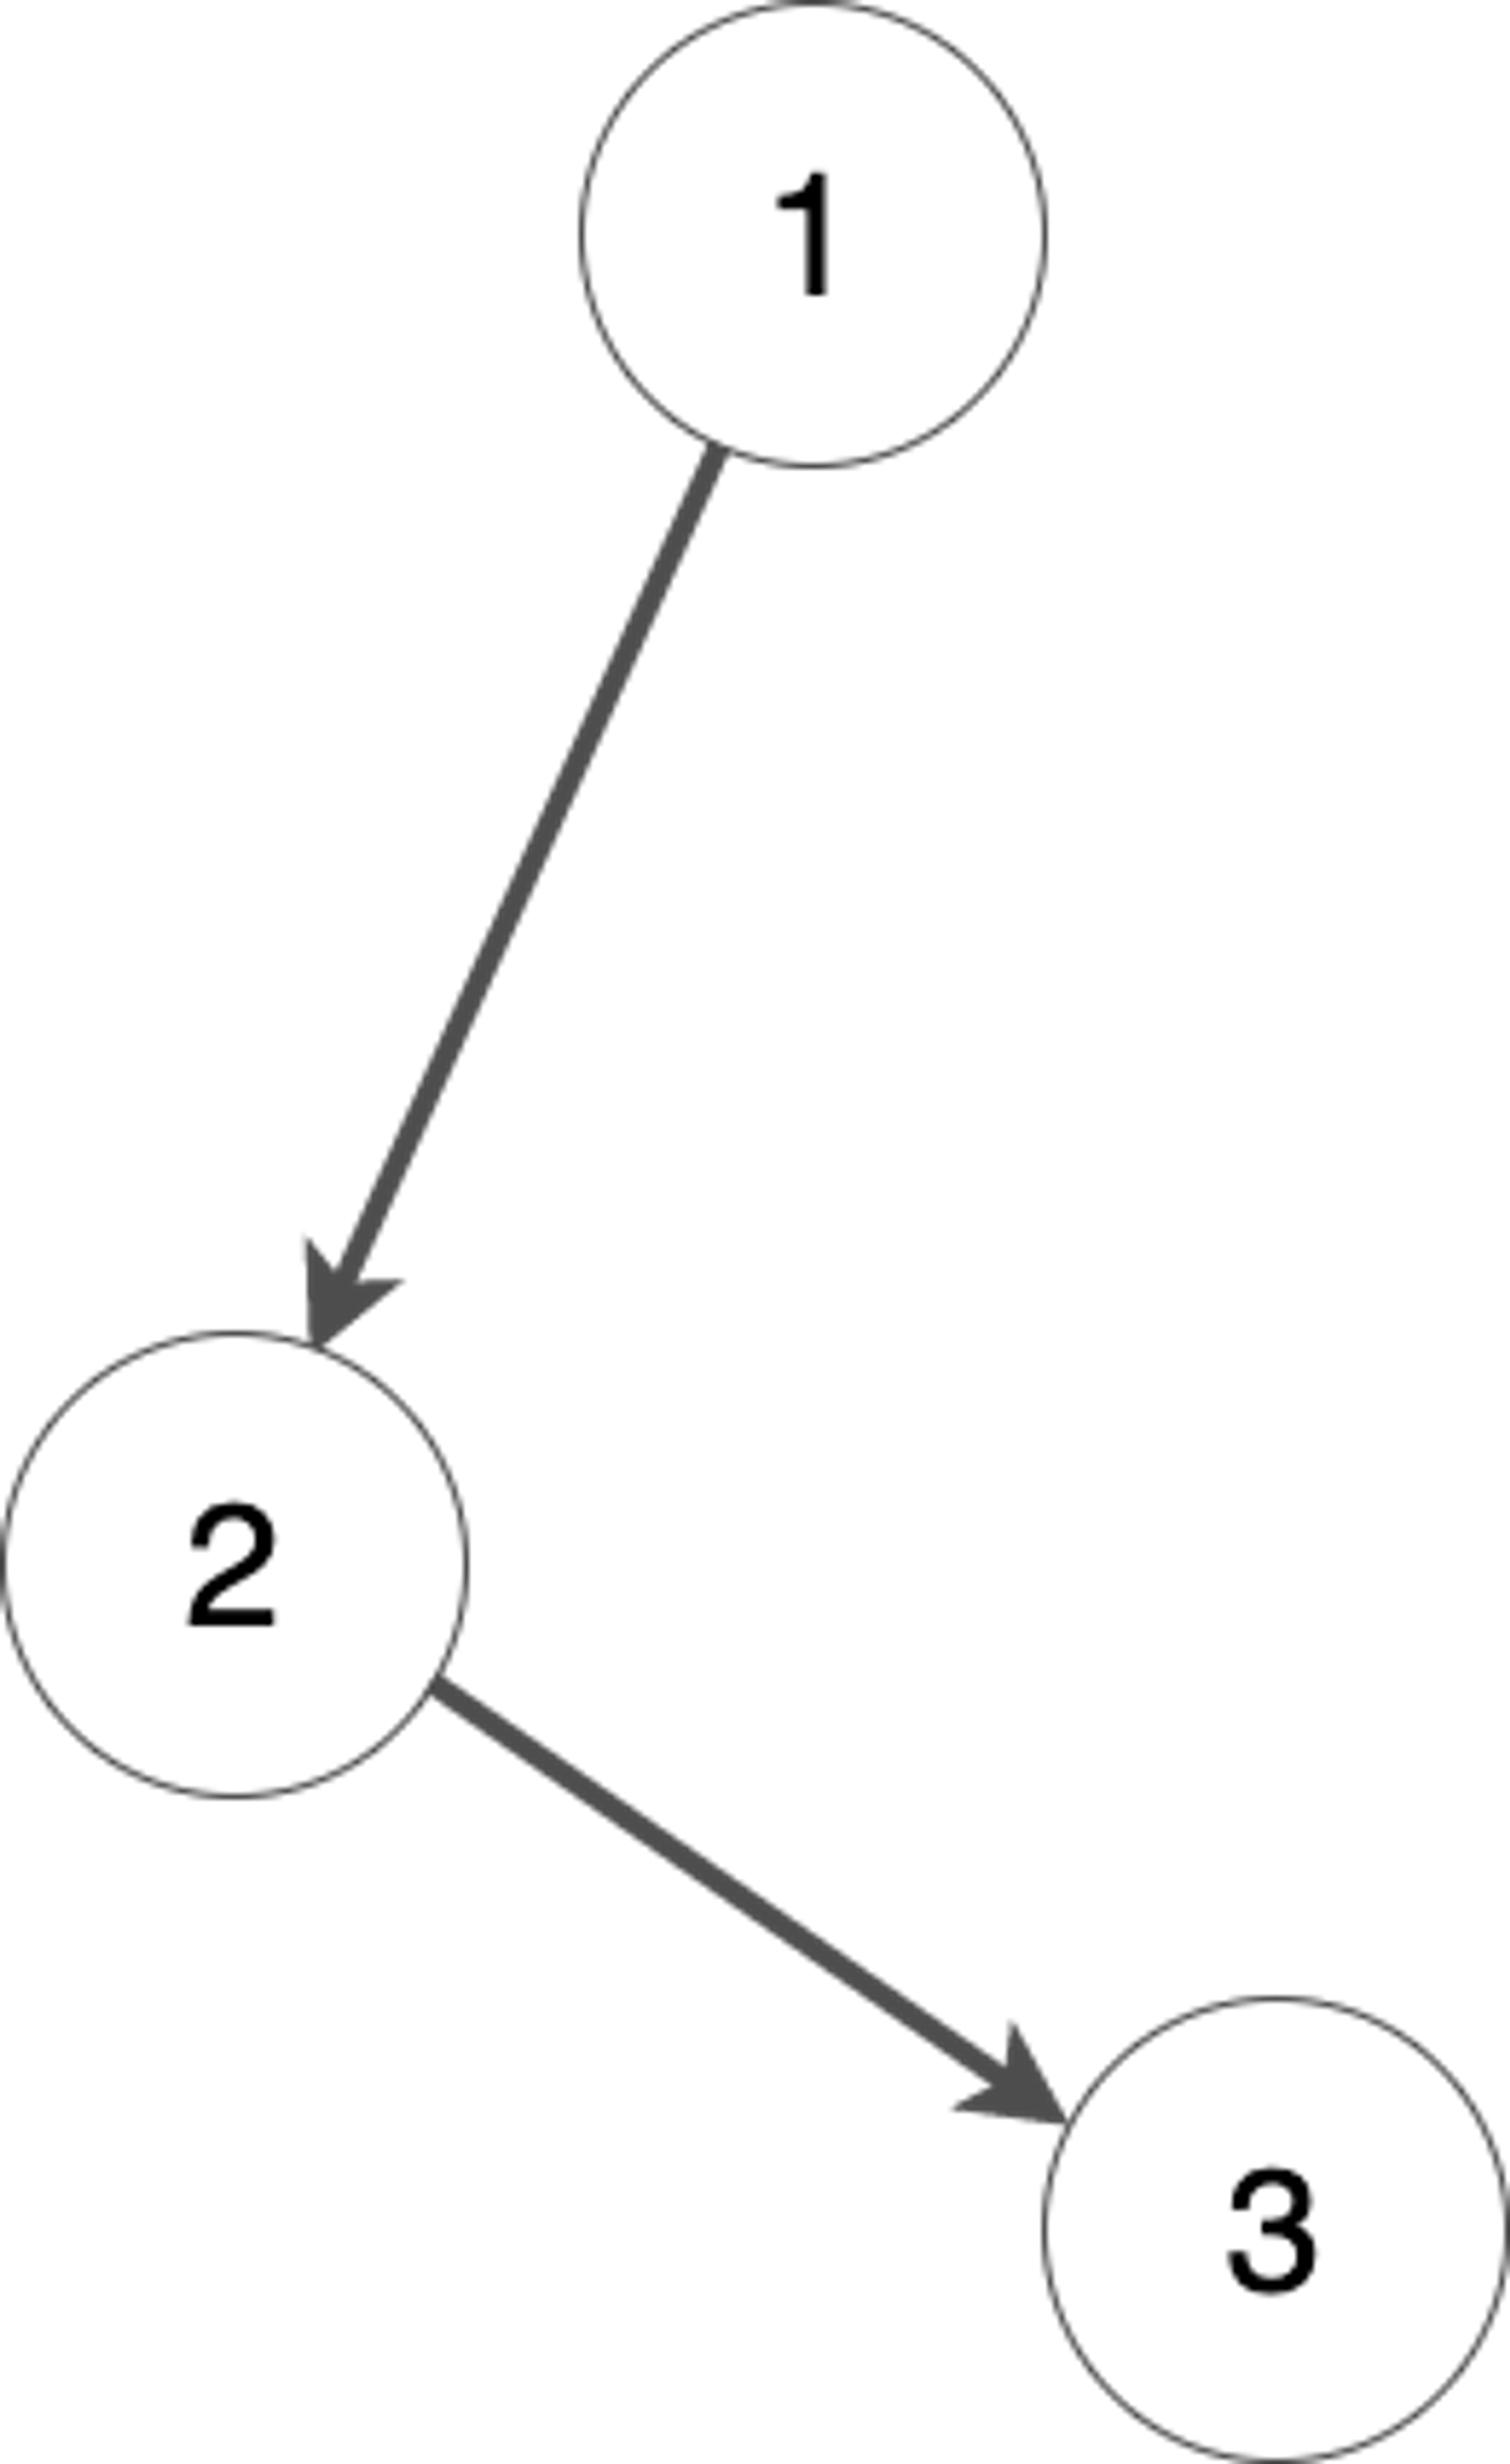 Example 1: Vertex 1 has no incoming edges, while has 1 outgoing edge ⇒ the graph is not balanced.